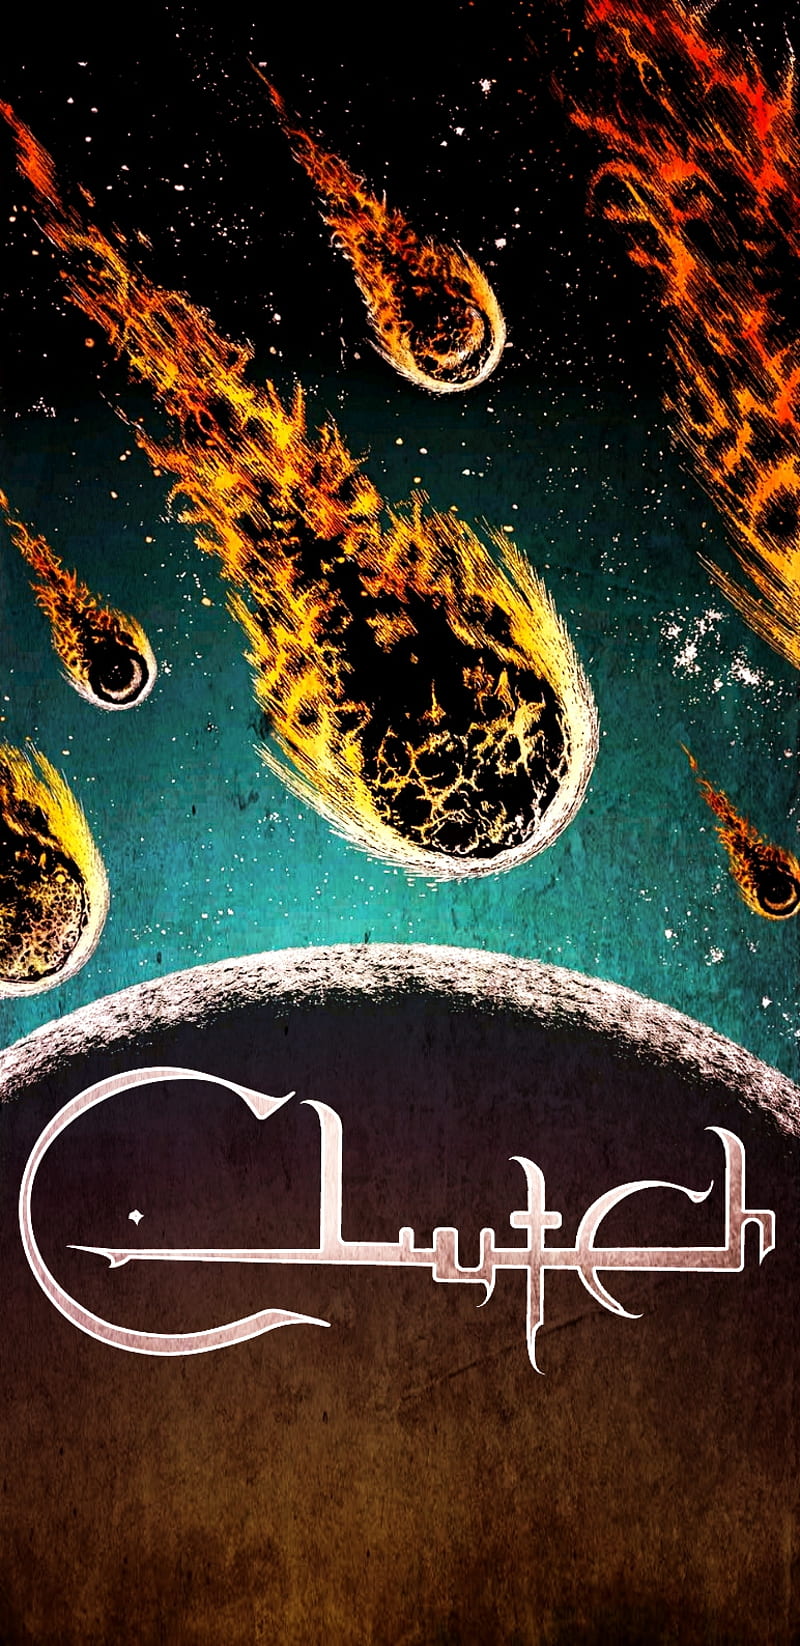 Clutch meteor, 2018, awesome, band logo, best, grunge, music, rock, HD phone wallpaper